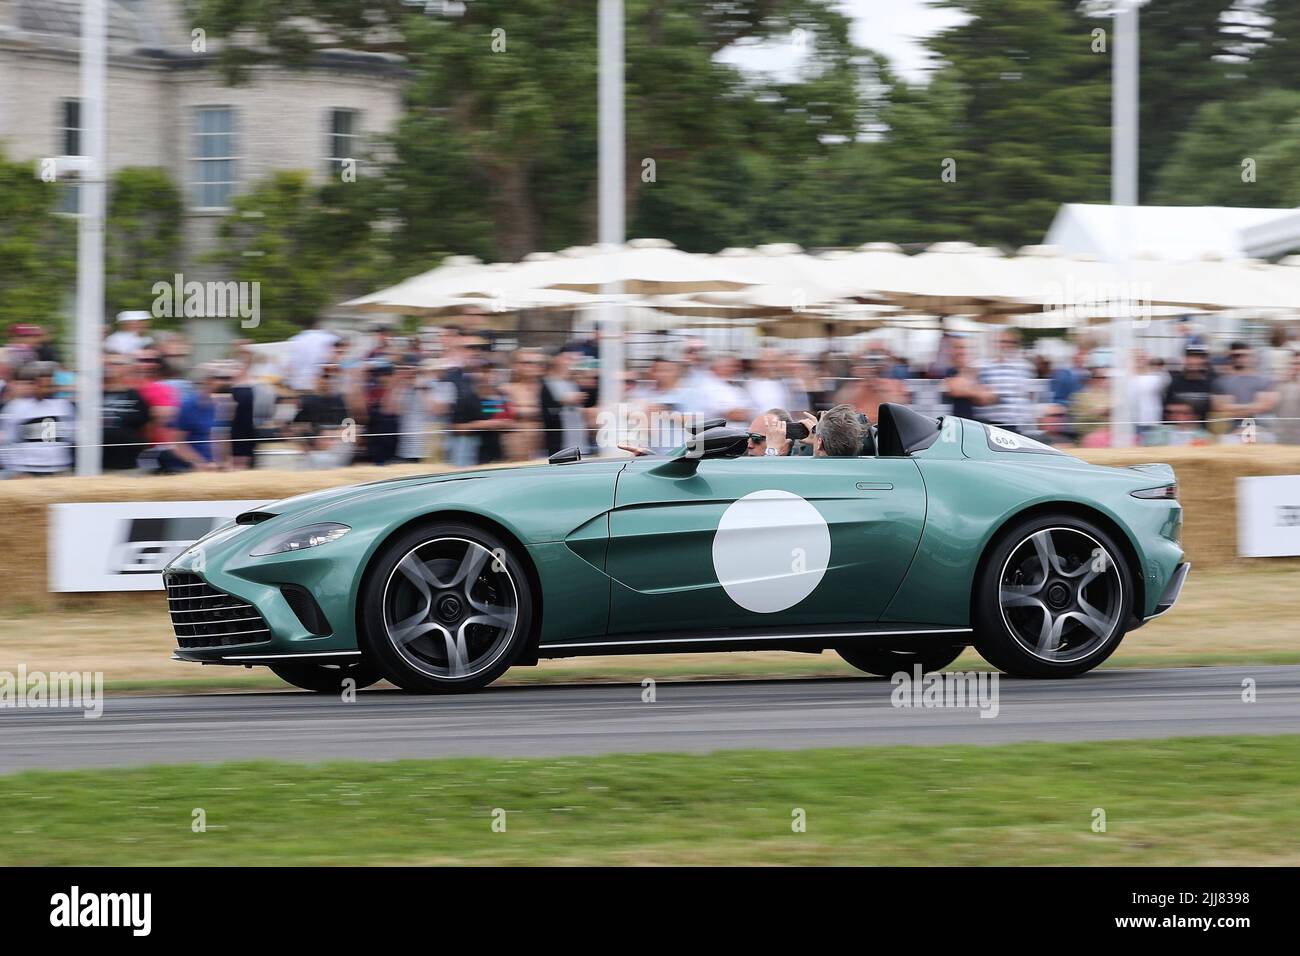 Aston Martin V12 Speedster supercar at the Festival of Speed 2022 at Goodwood, Sussex, UK Stock Photo